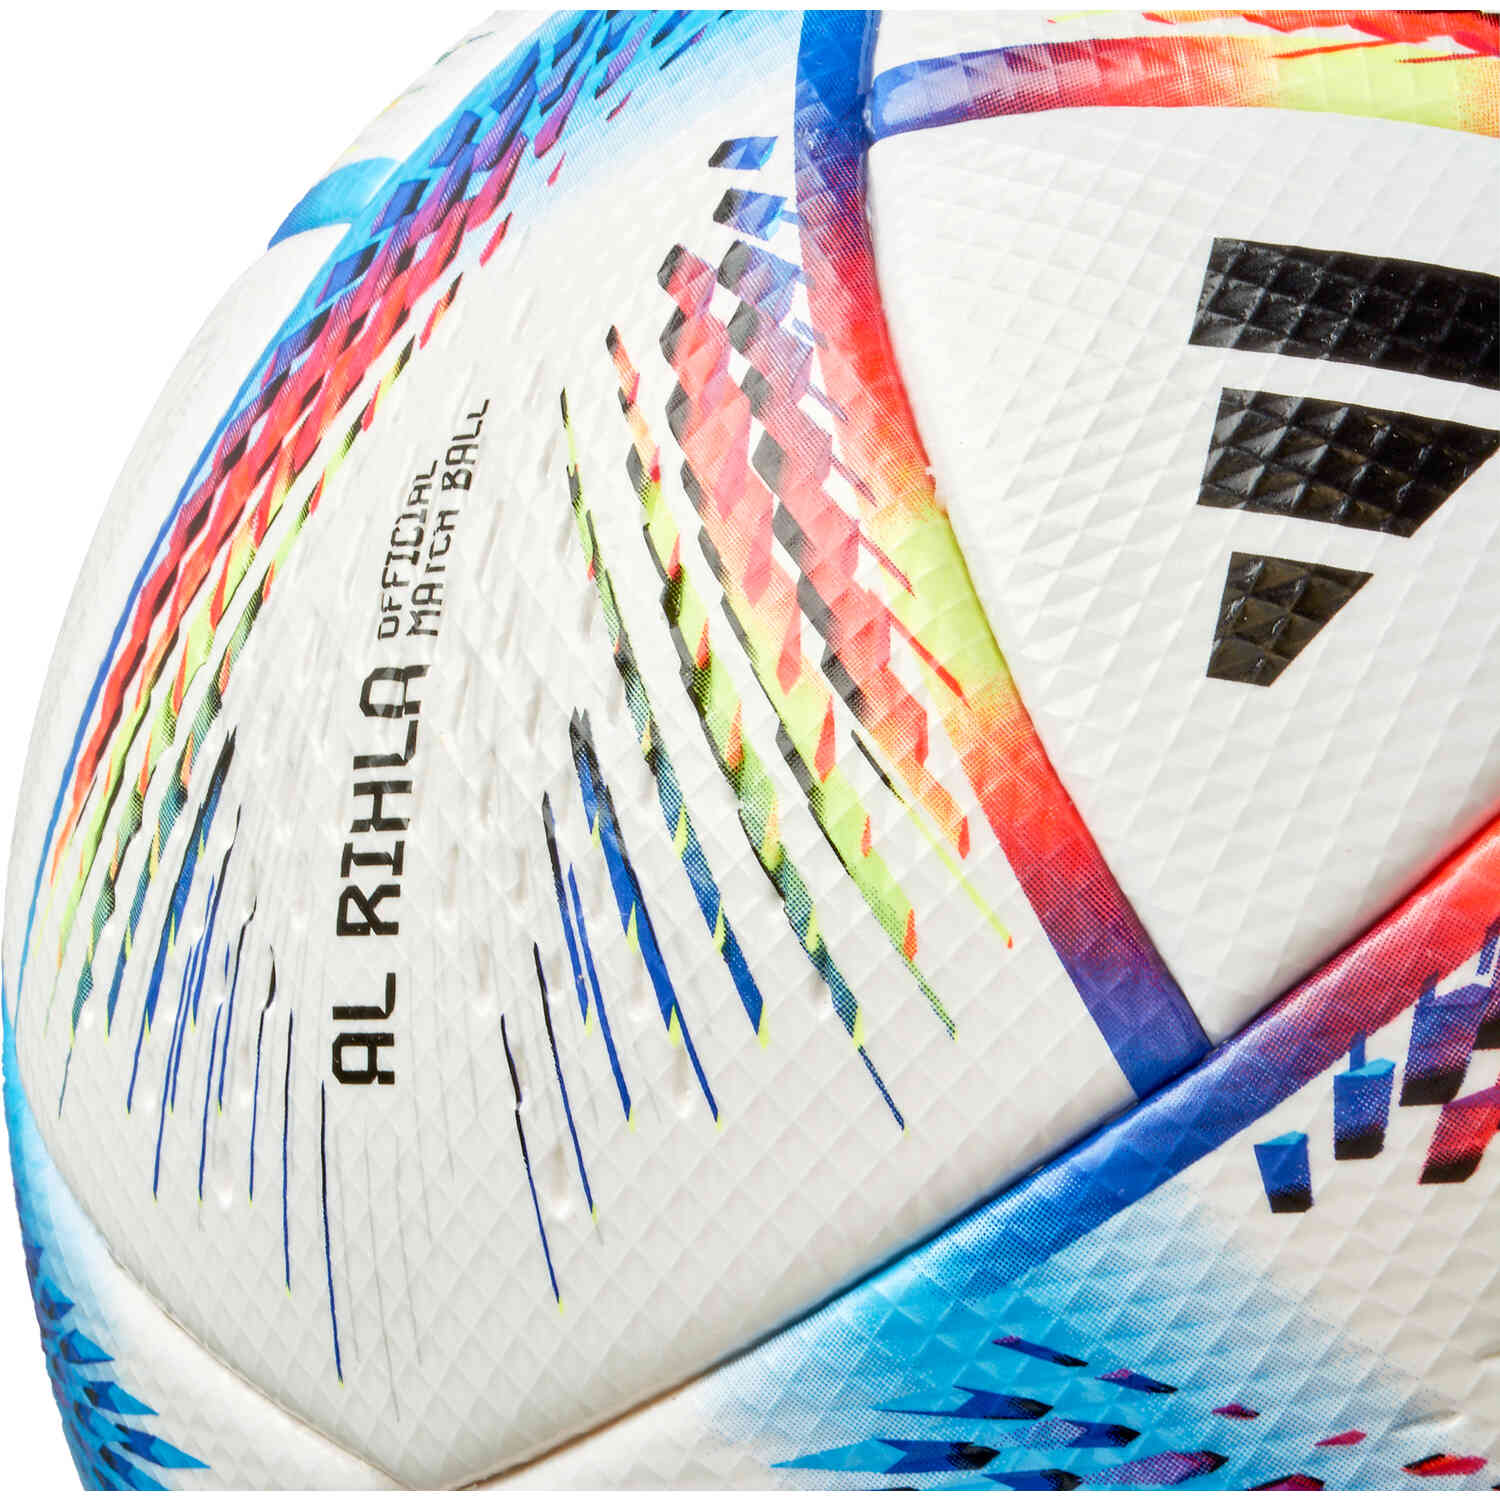 adidas reveals 'Al Rihla' – the new Official Match Ball of the FIFA World  Cup 2022™